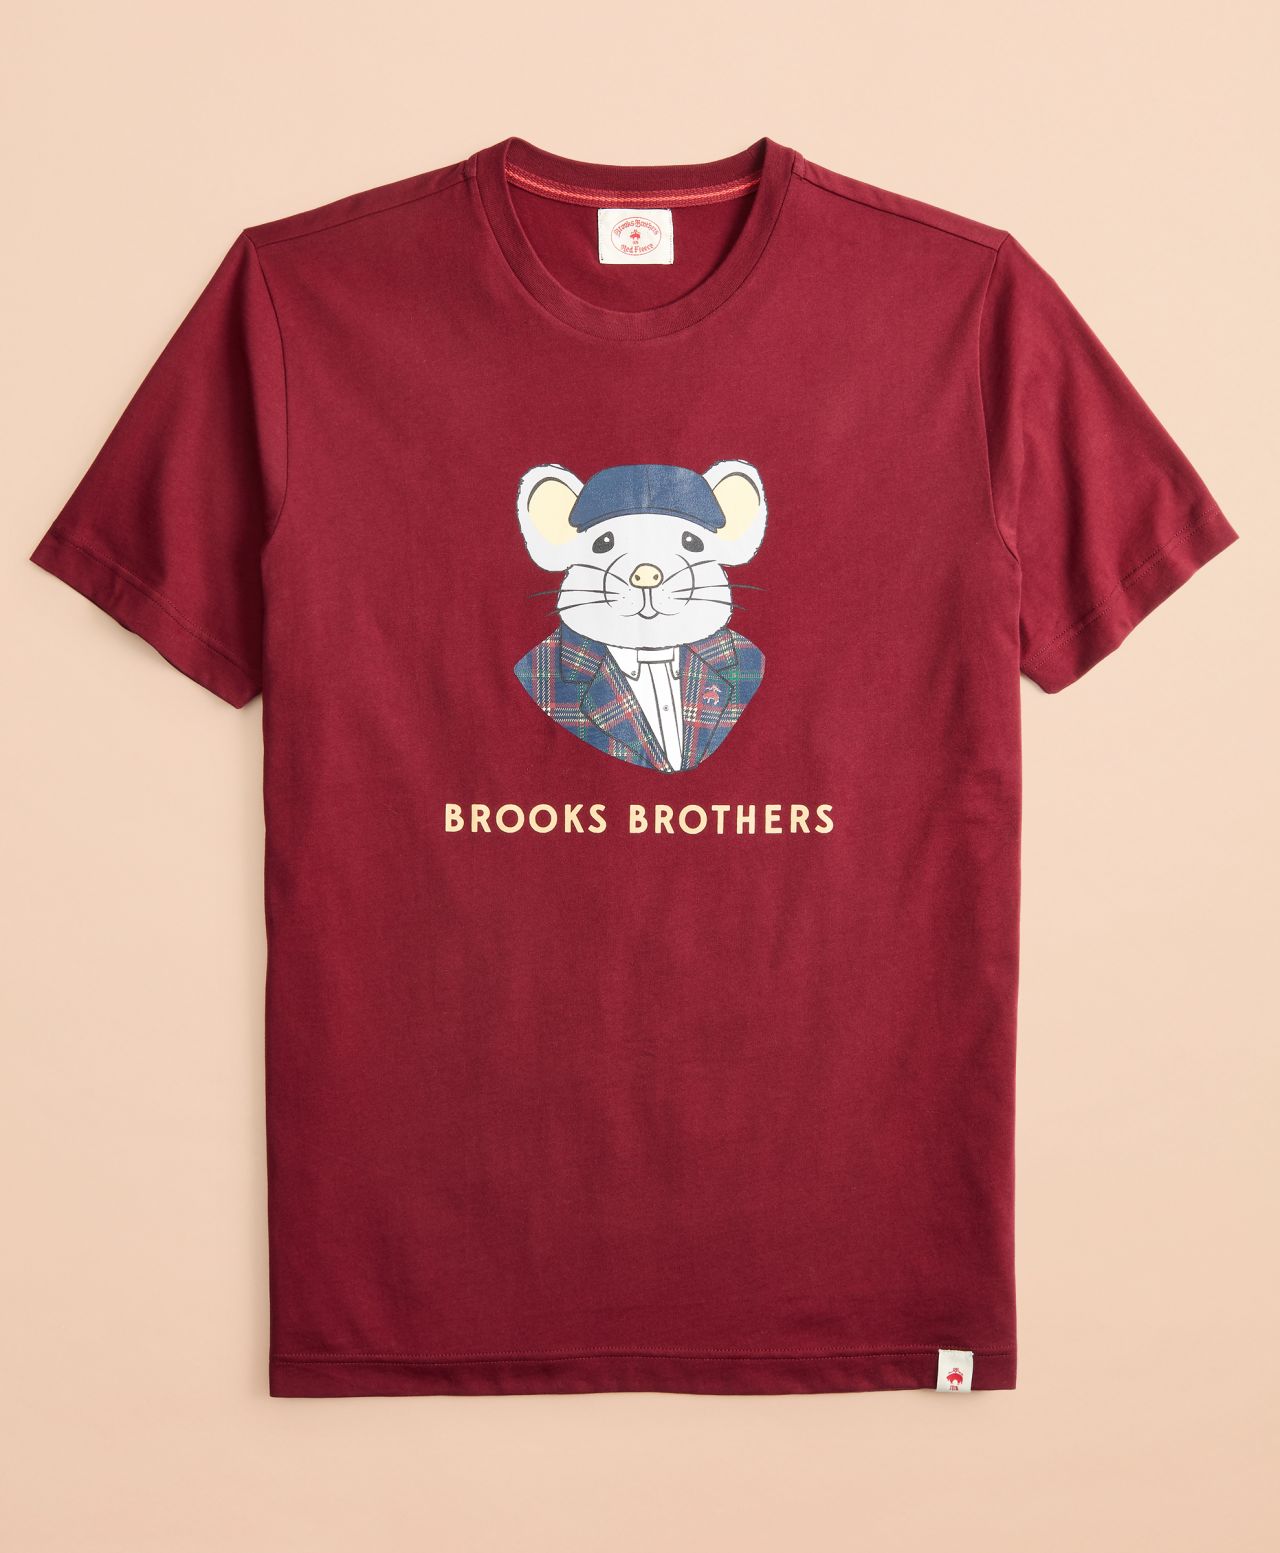 A Year of the Rat T-shirt from the Brooks Brothers' festive collection.